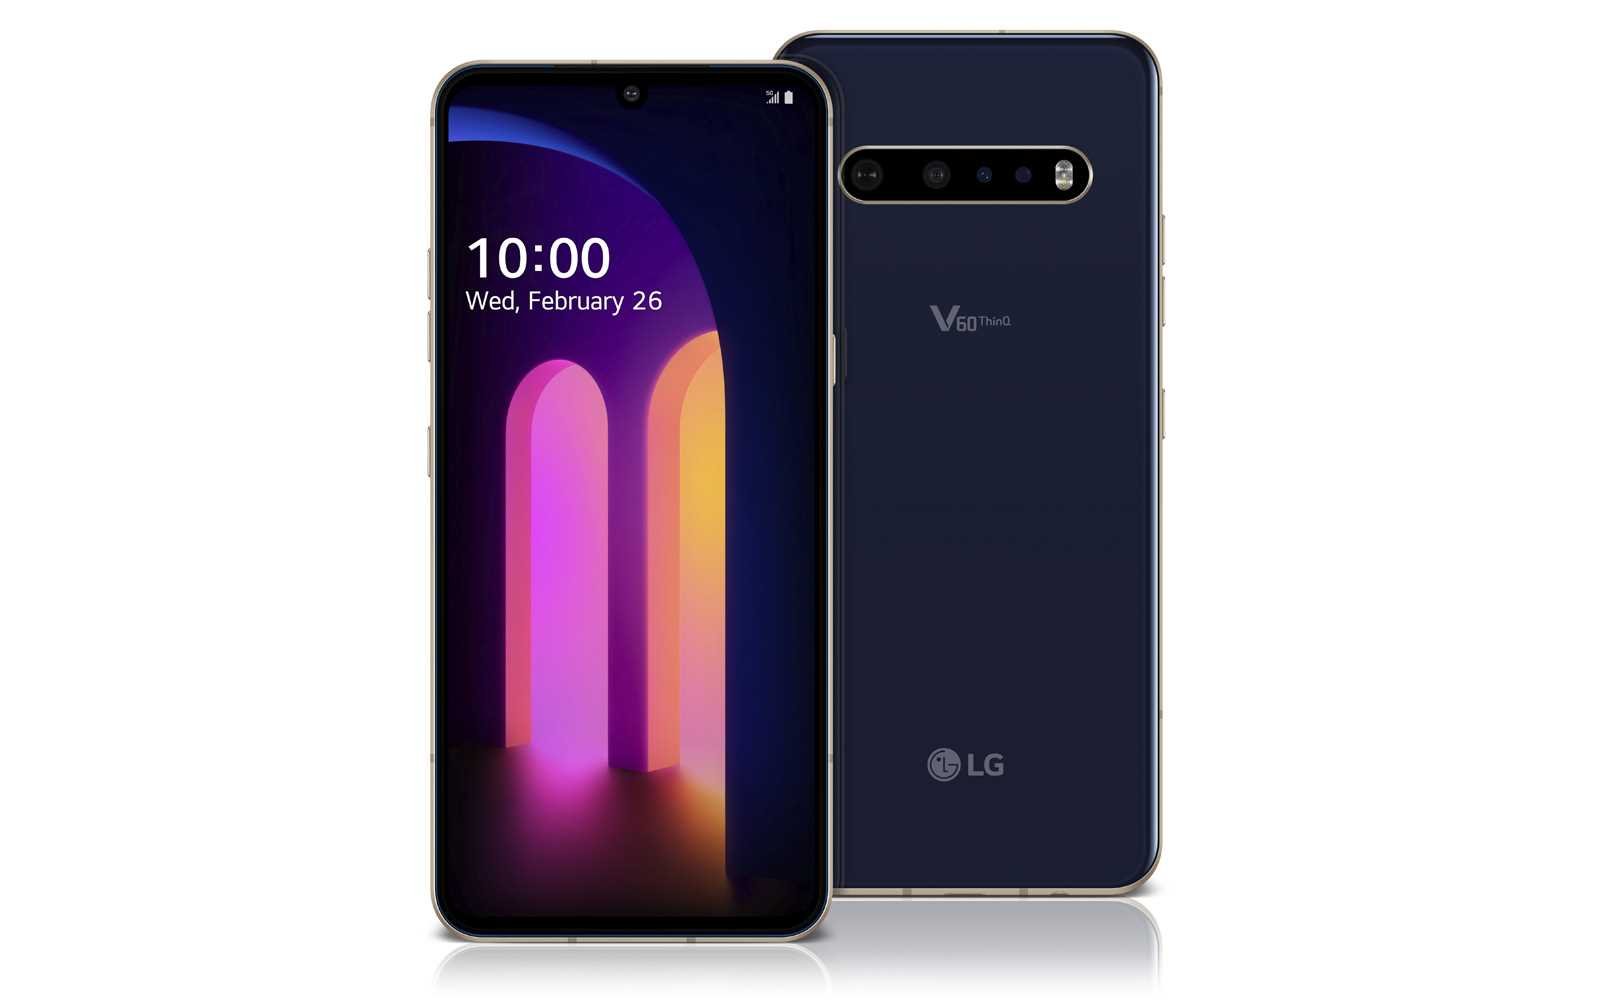 LG V60 ThinQ 5G specs, review, release date - PhonesData